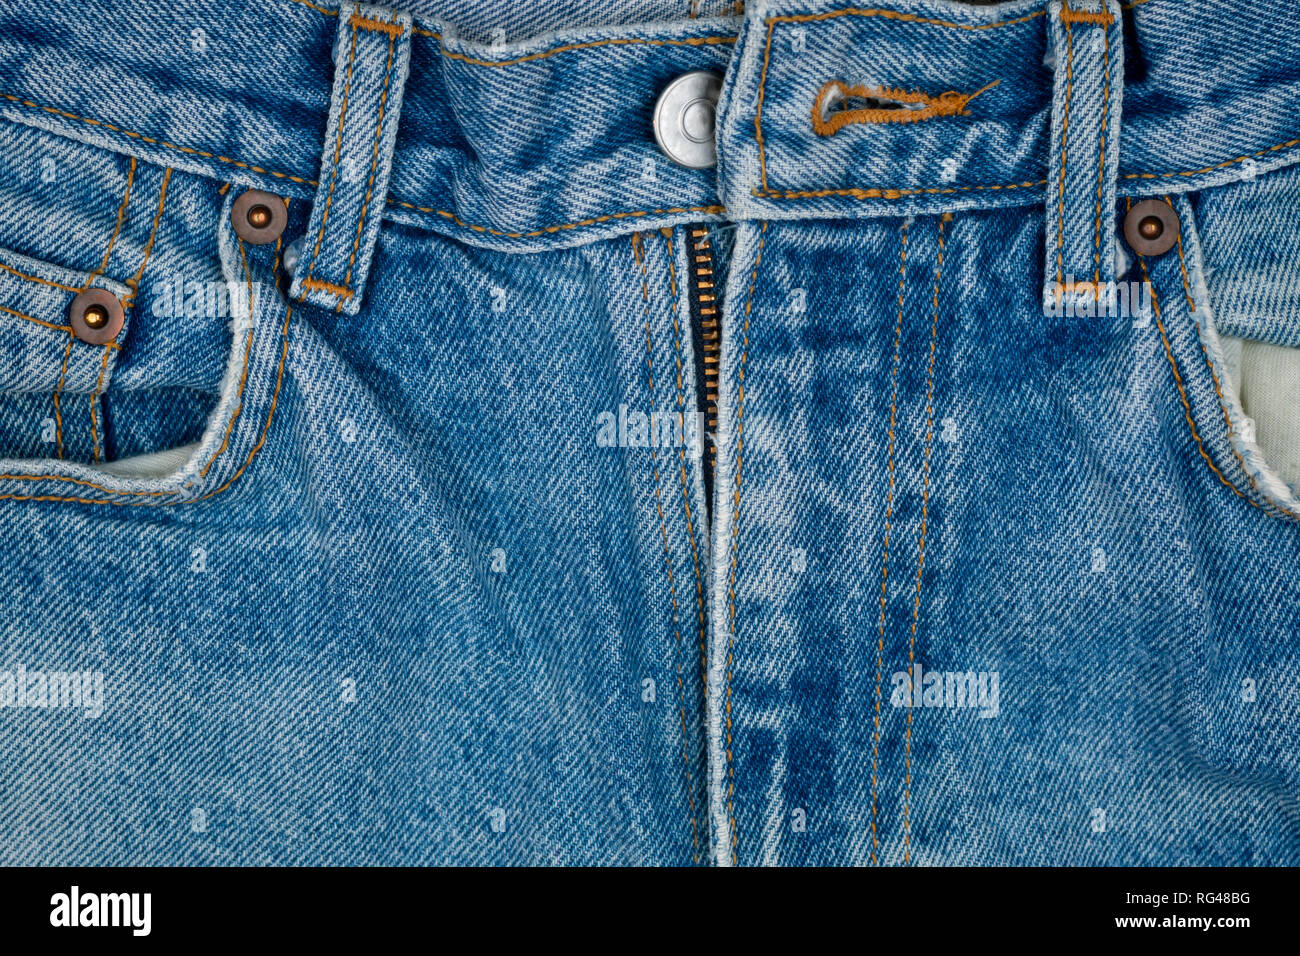 close-up details of worn pants jeans Stock - Alamy